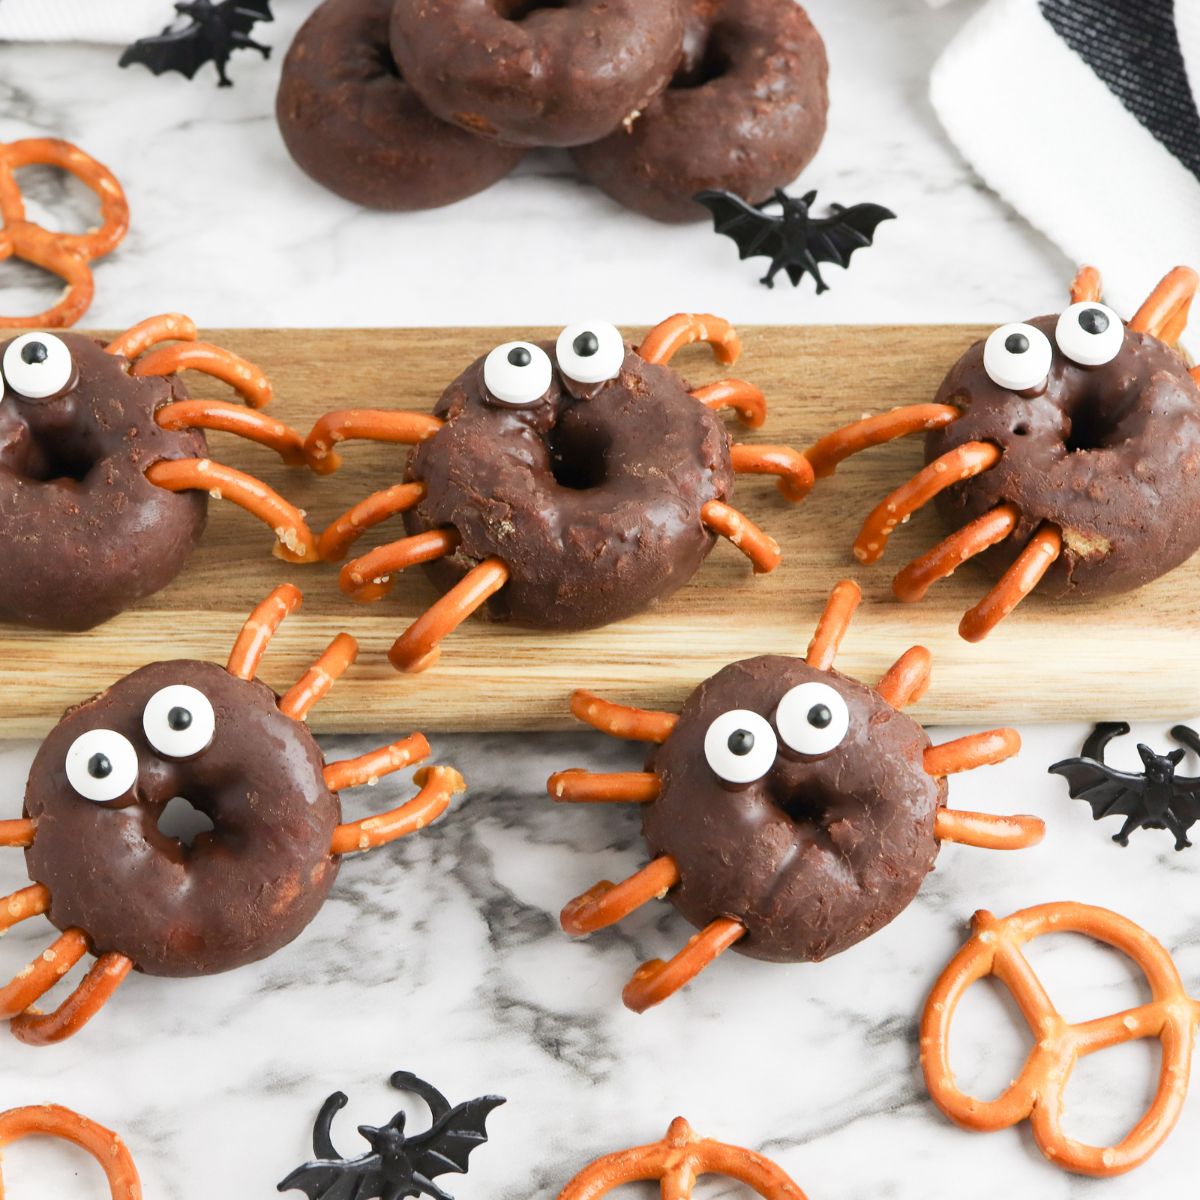 Chocolate spider donuts with pretzels on a cutting board.